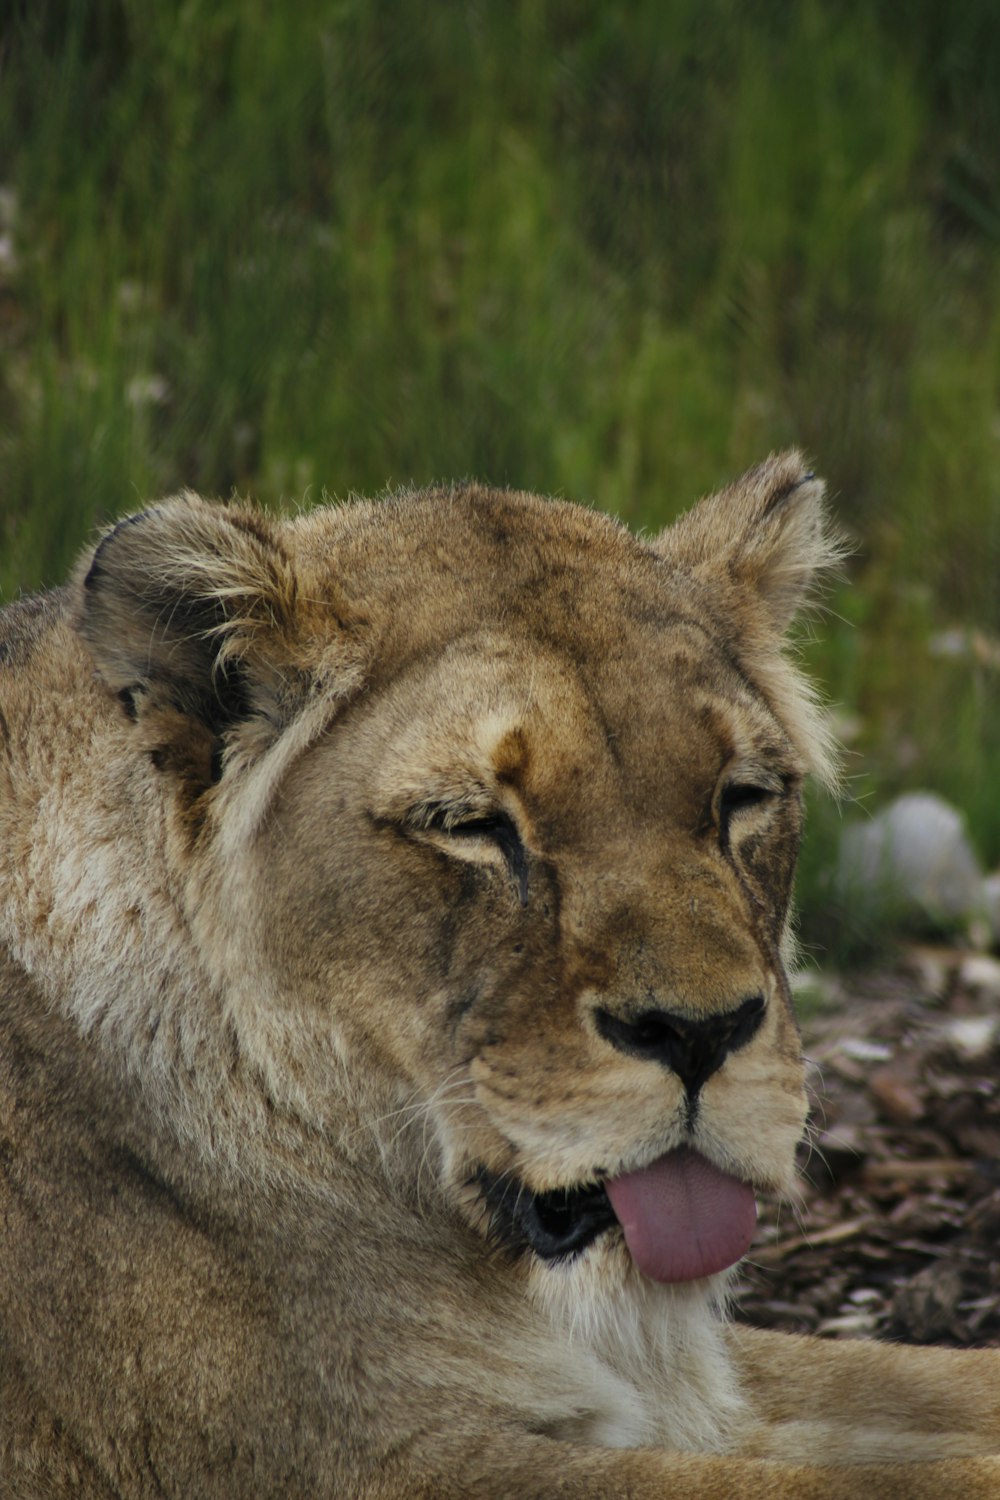 a close up of a lion laying on the ground